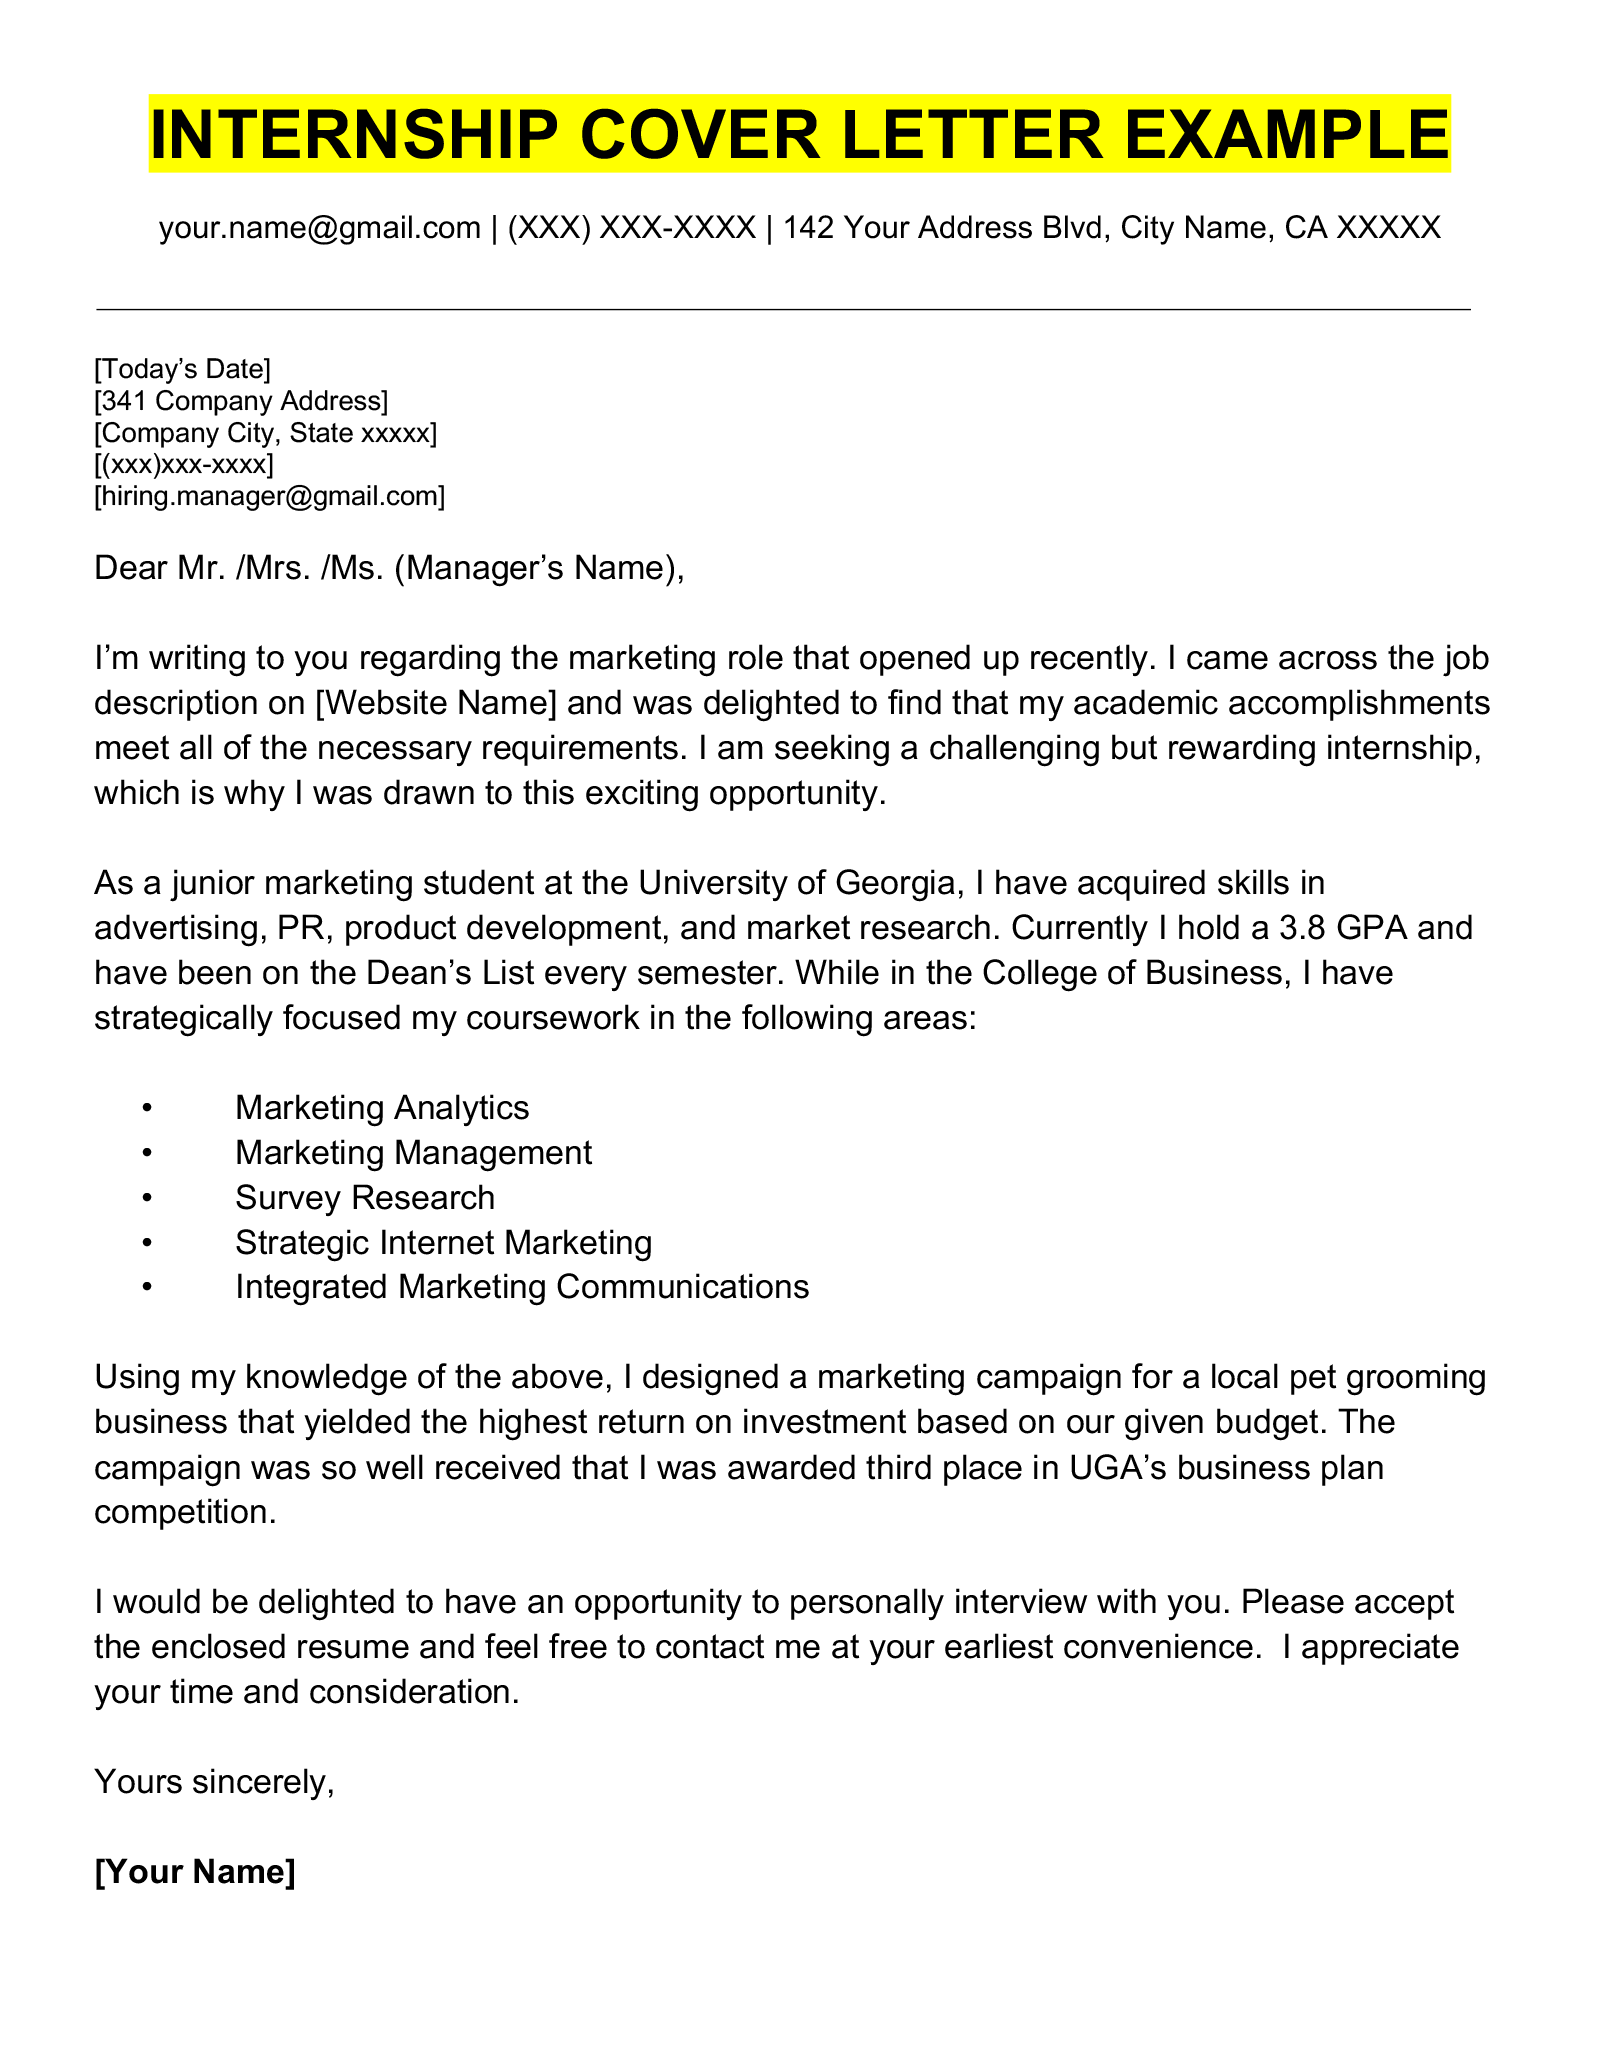 High School Student Cover Letter | Sample & Writing Tips